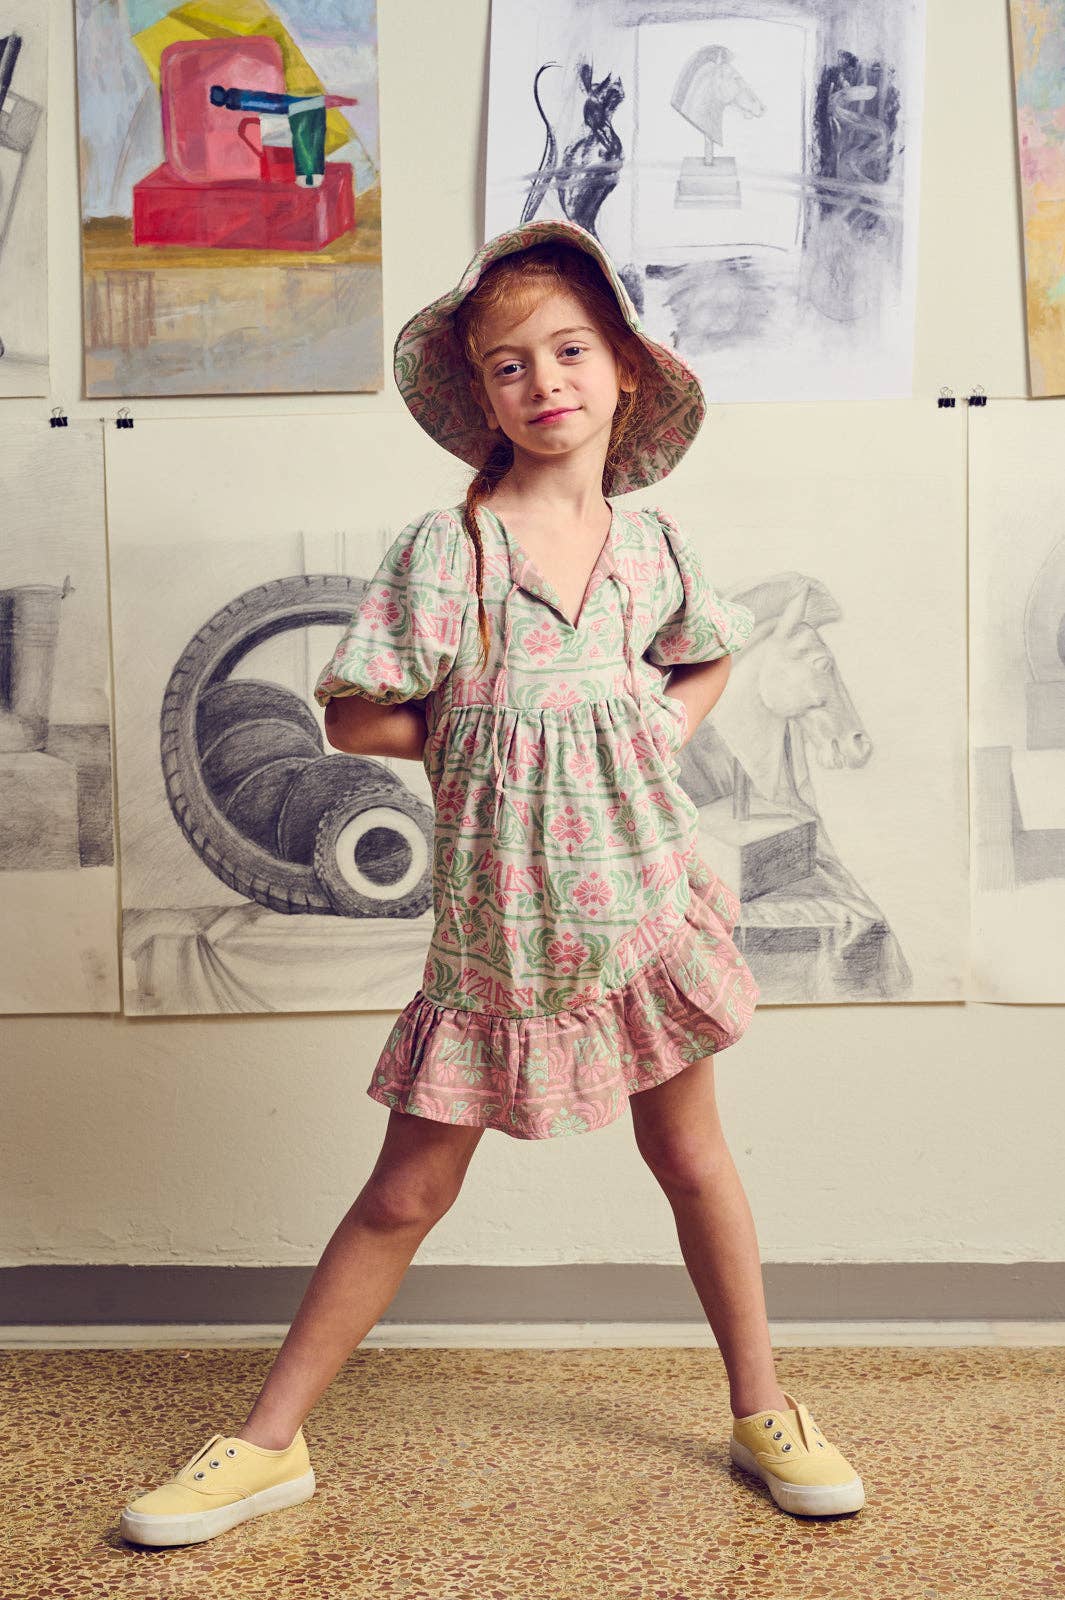 CooCootales - Sustainable Concept Clothing for Babies, Toddlers & Kids